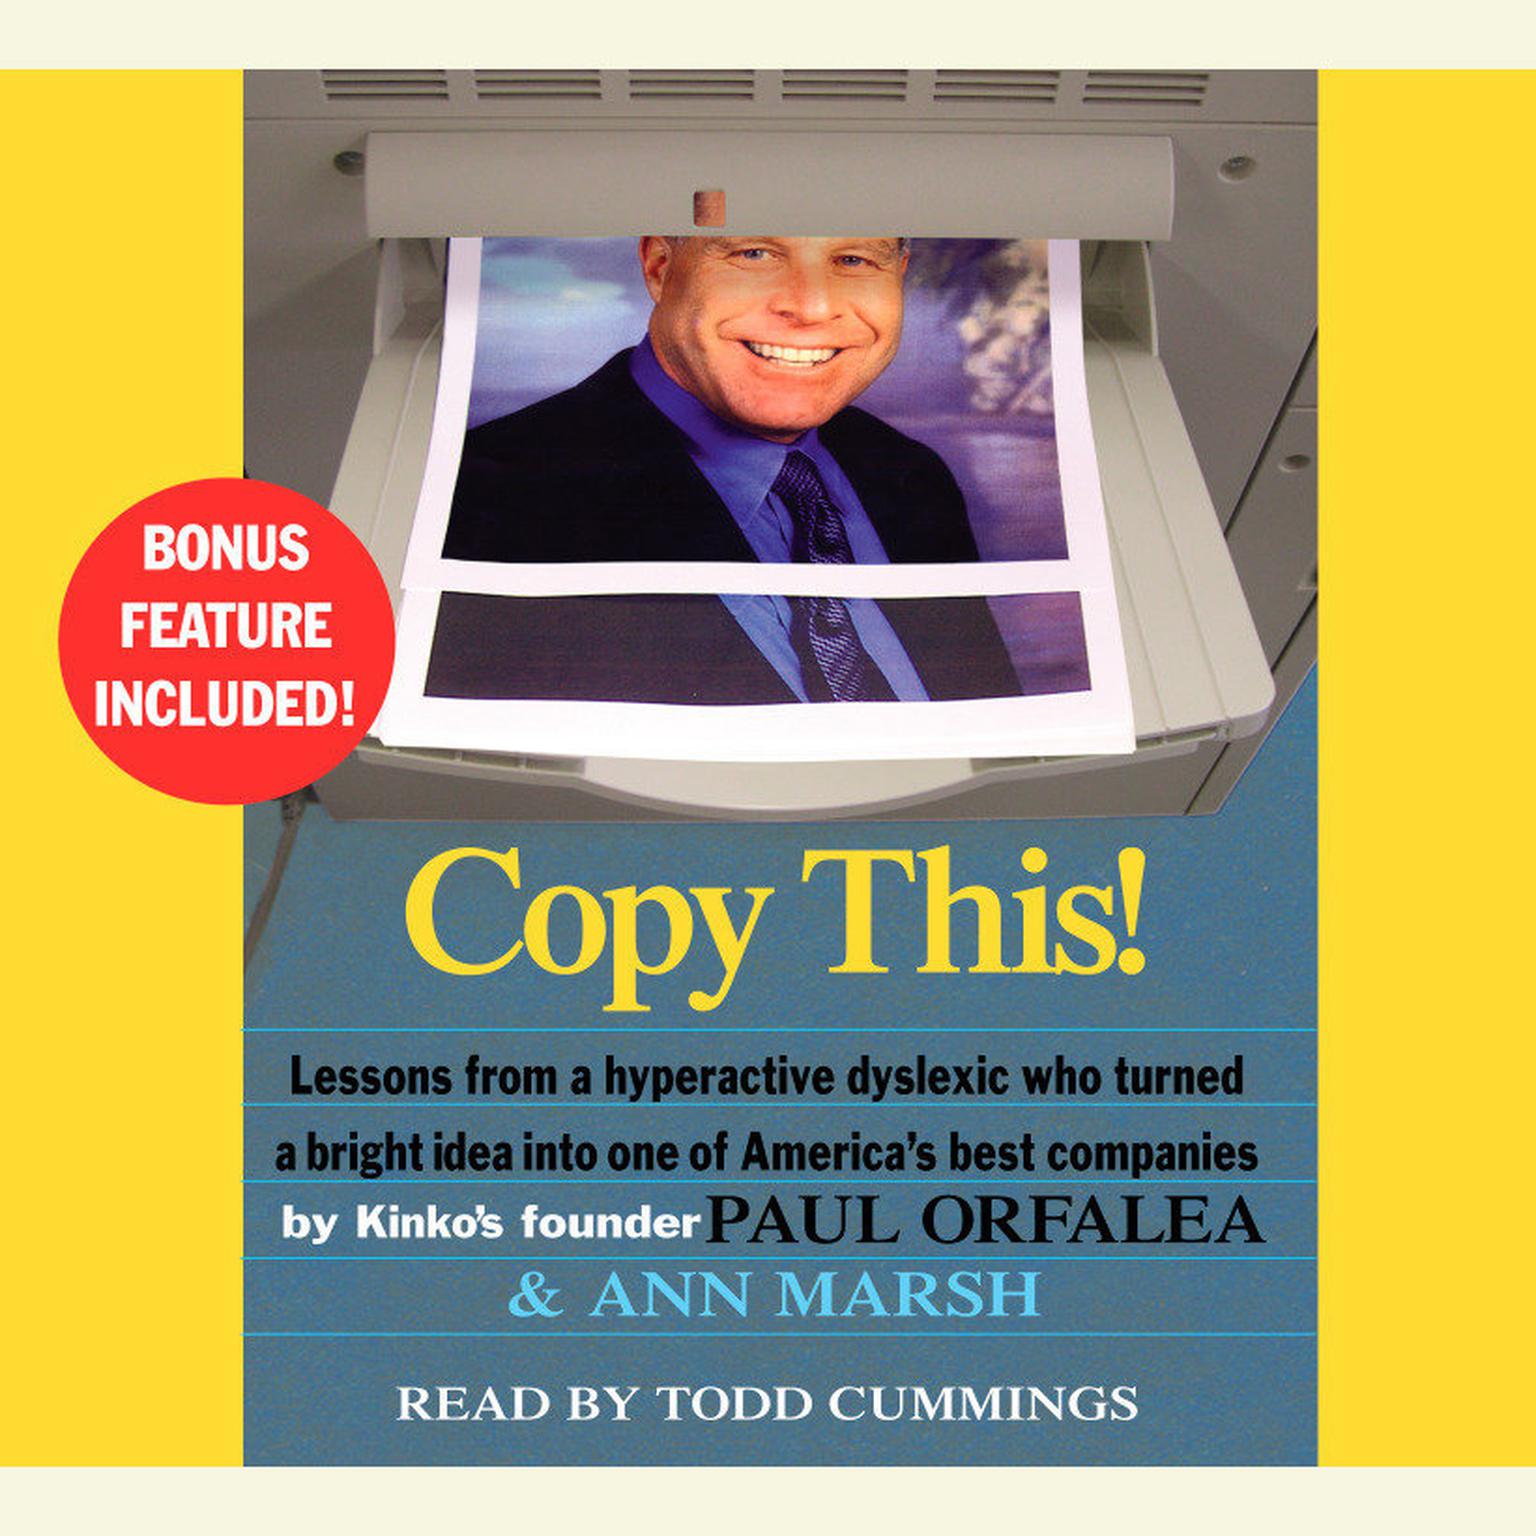 Copy This! (Abridged): Lessons from a Hyperactive Dyslexic Who Turned a Bright Idea into One of Americas Best Companies Audiobook, by Paul Orfalea